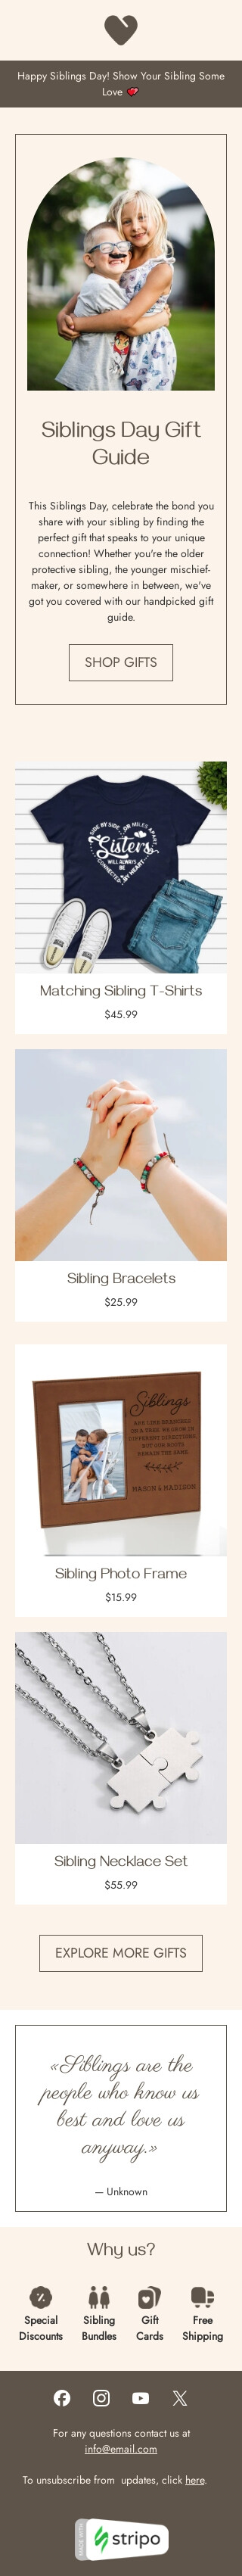 Siblings Day email template "Gift for siblings" for ecommerce industry mobile view